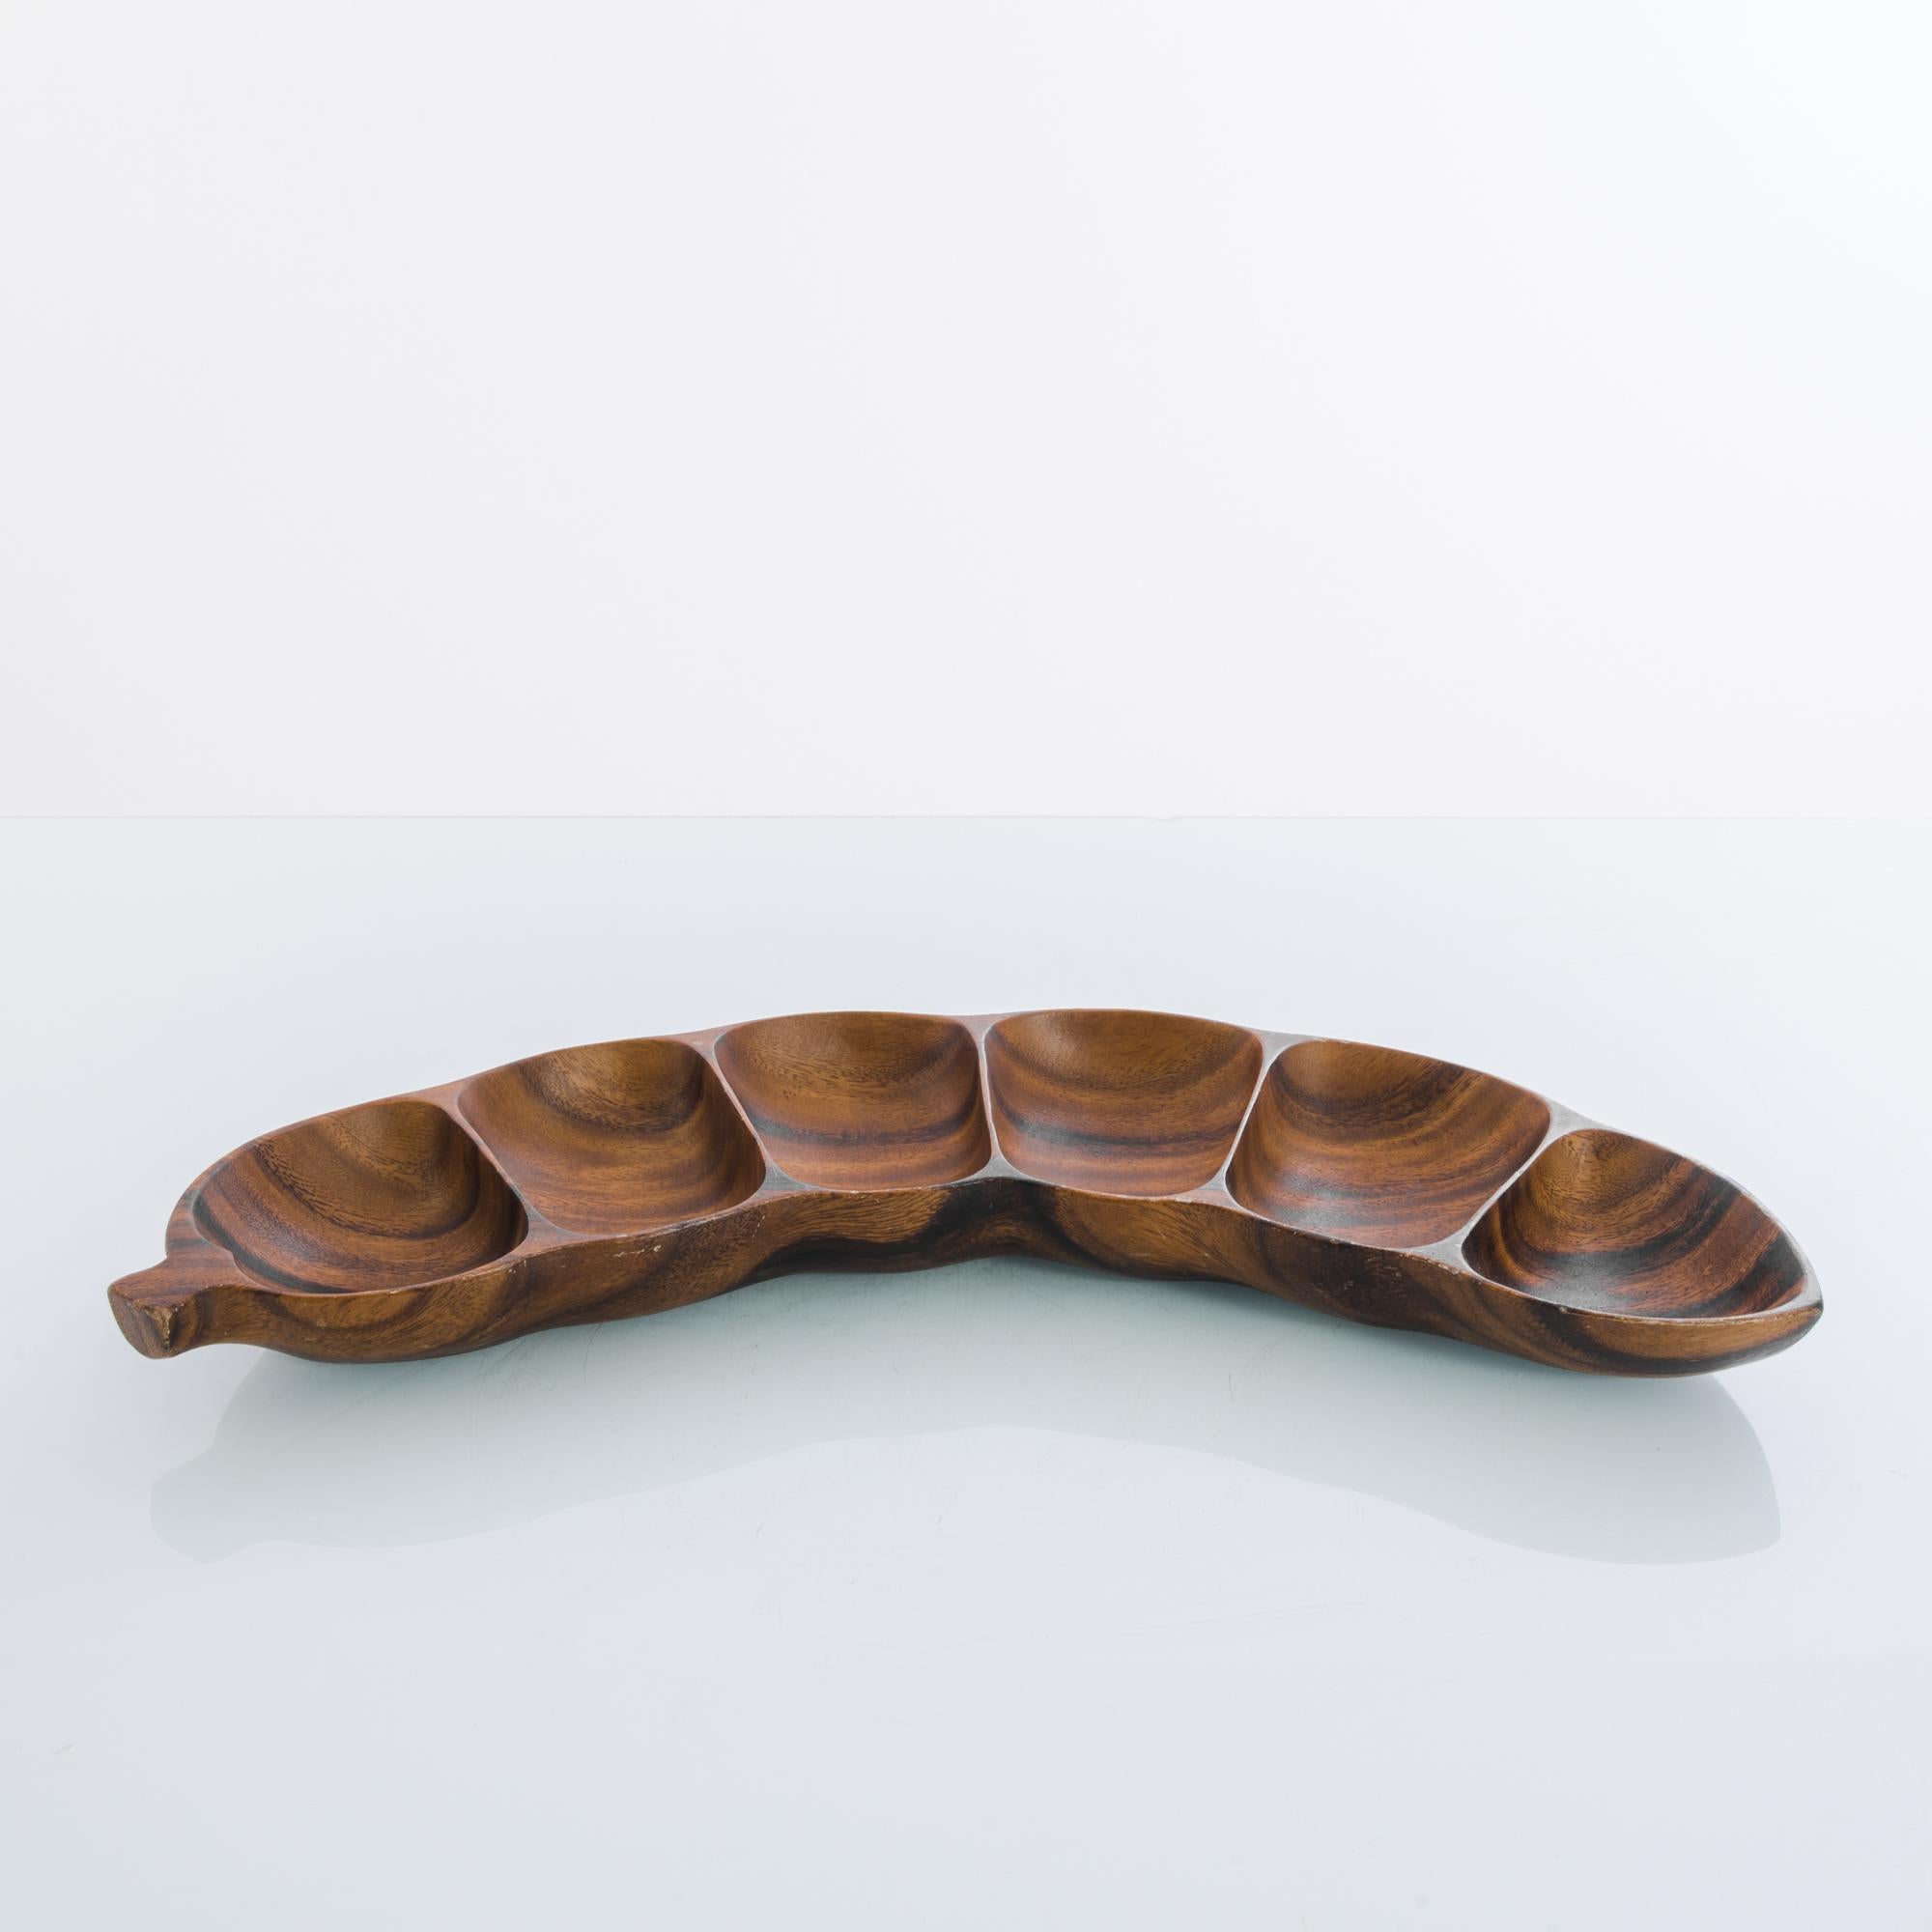 A wooden bowl from 1970s Denmark in the shape of a bean pod. The six partitions of the bowl mimic the natural form of the bean; the wood has a rich color with warm reddish tones and a dark grain, brought out by a fine polish. The unique shape and